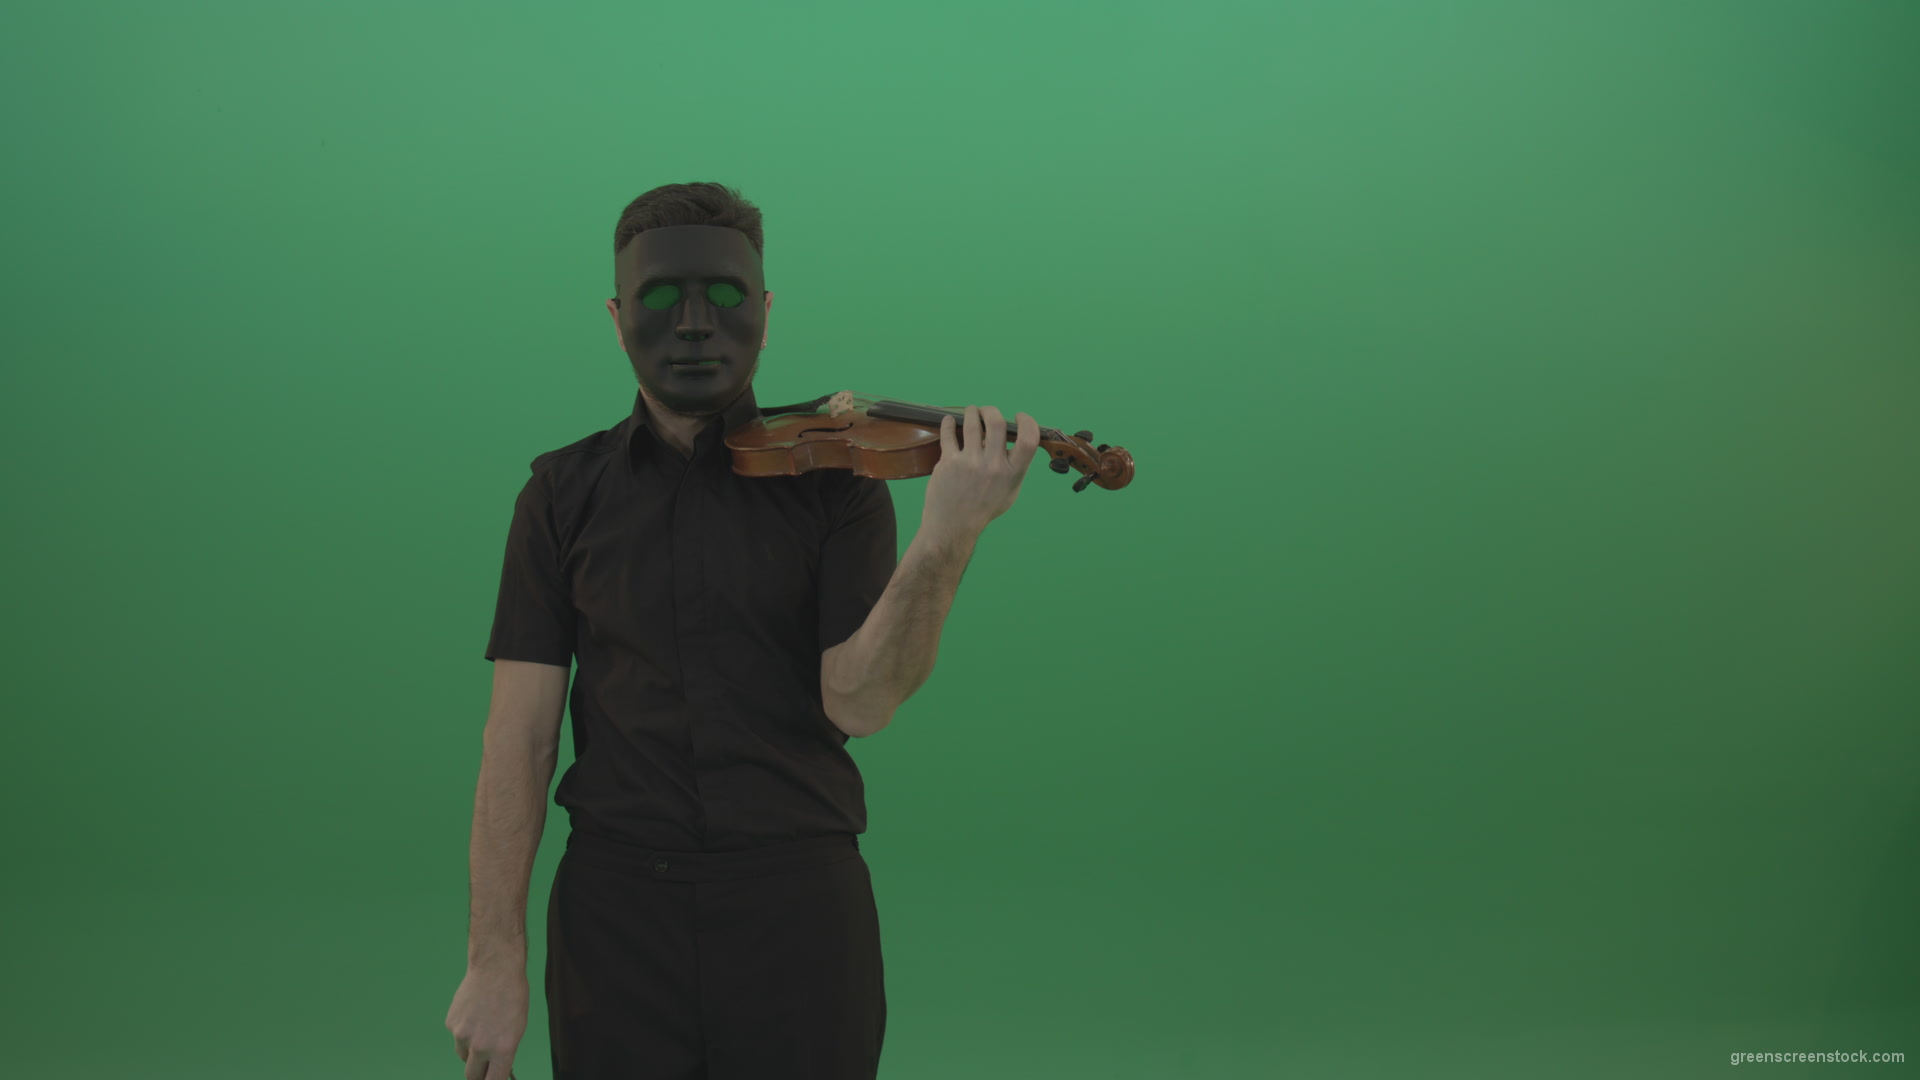 Man-in-black-shirt-and-mask-fast-play-violin-fiddle-strings-gothic-music-isolated-on-green-screen_001 Green Screen Stock